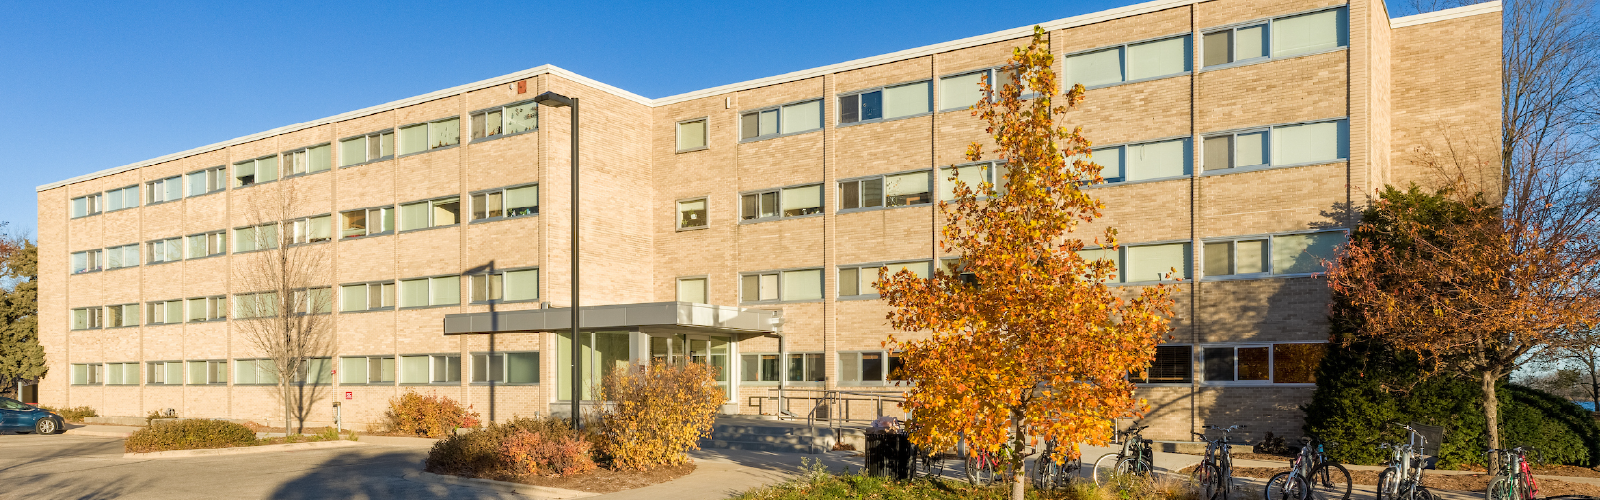 Phillips Residence Hall exterior in autumn